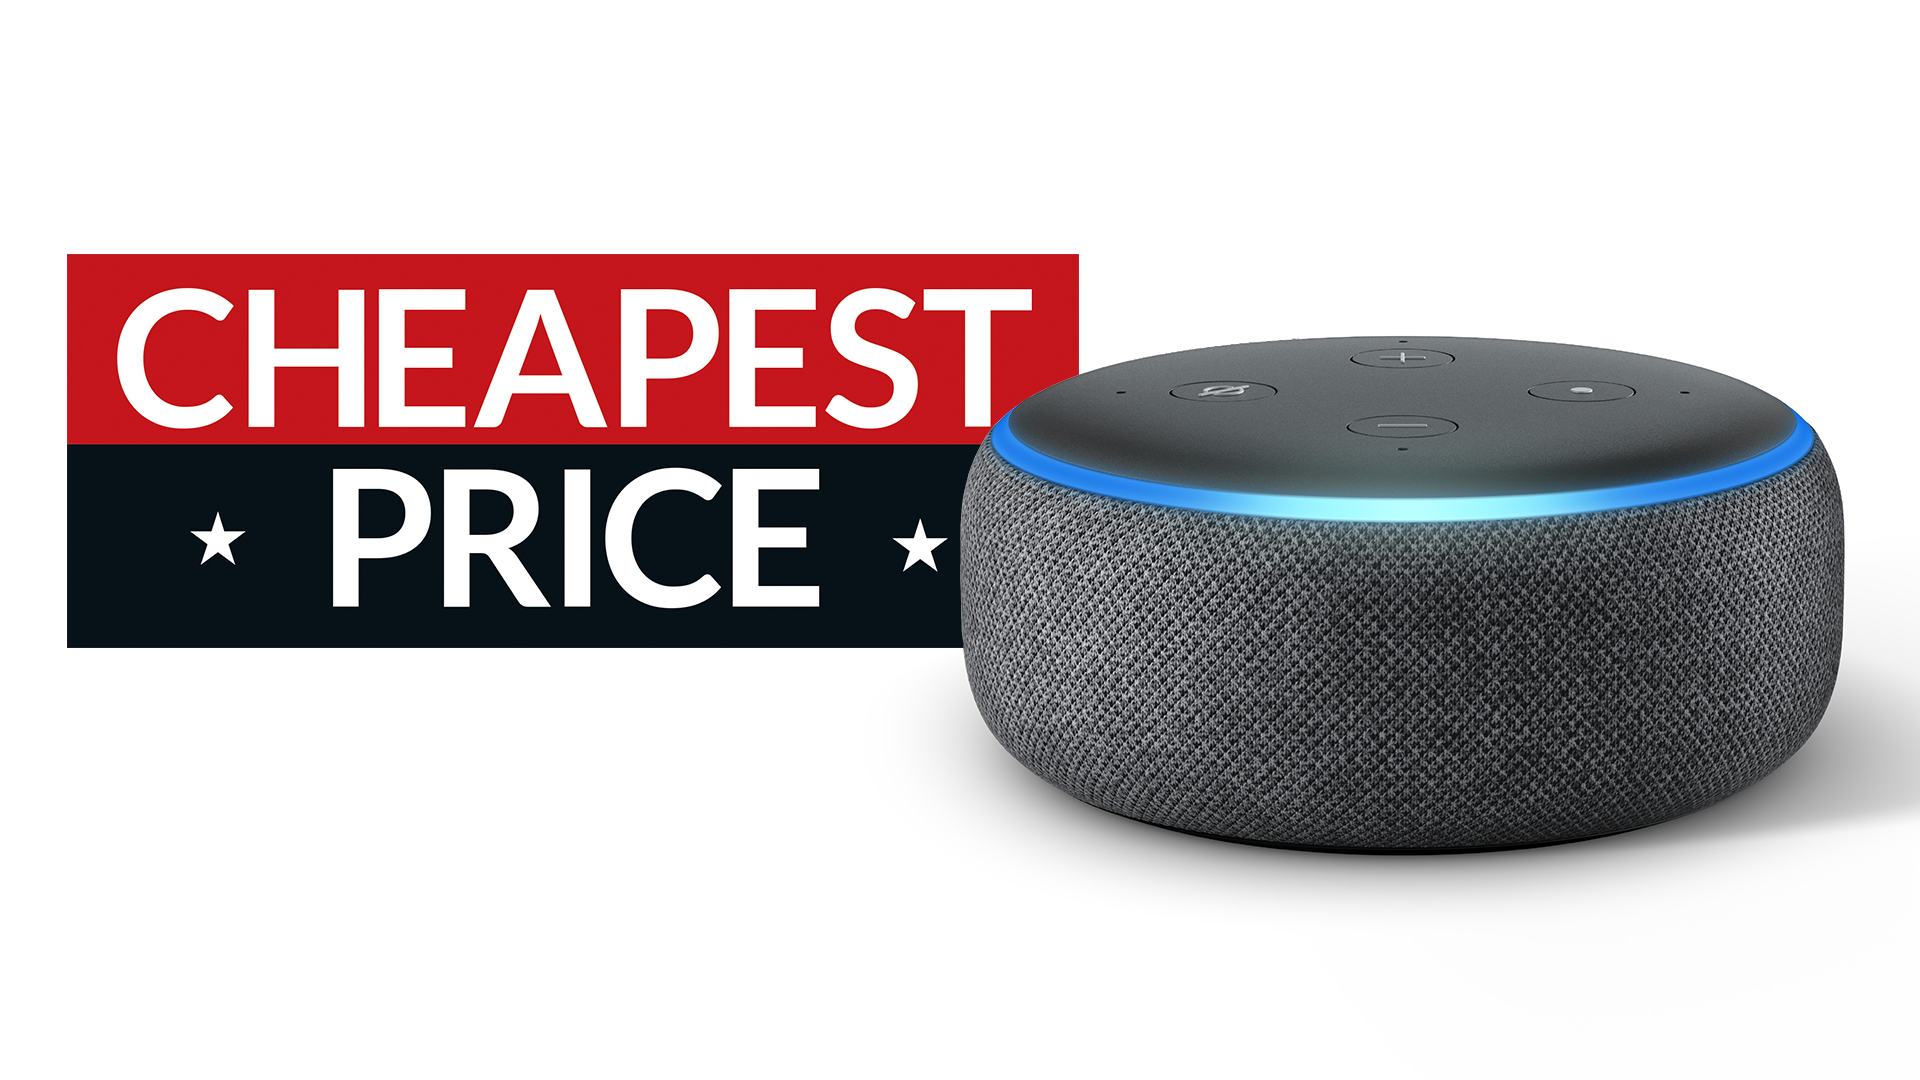 Echo Dot Deal: It's on Sale for Just $9